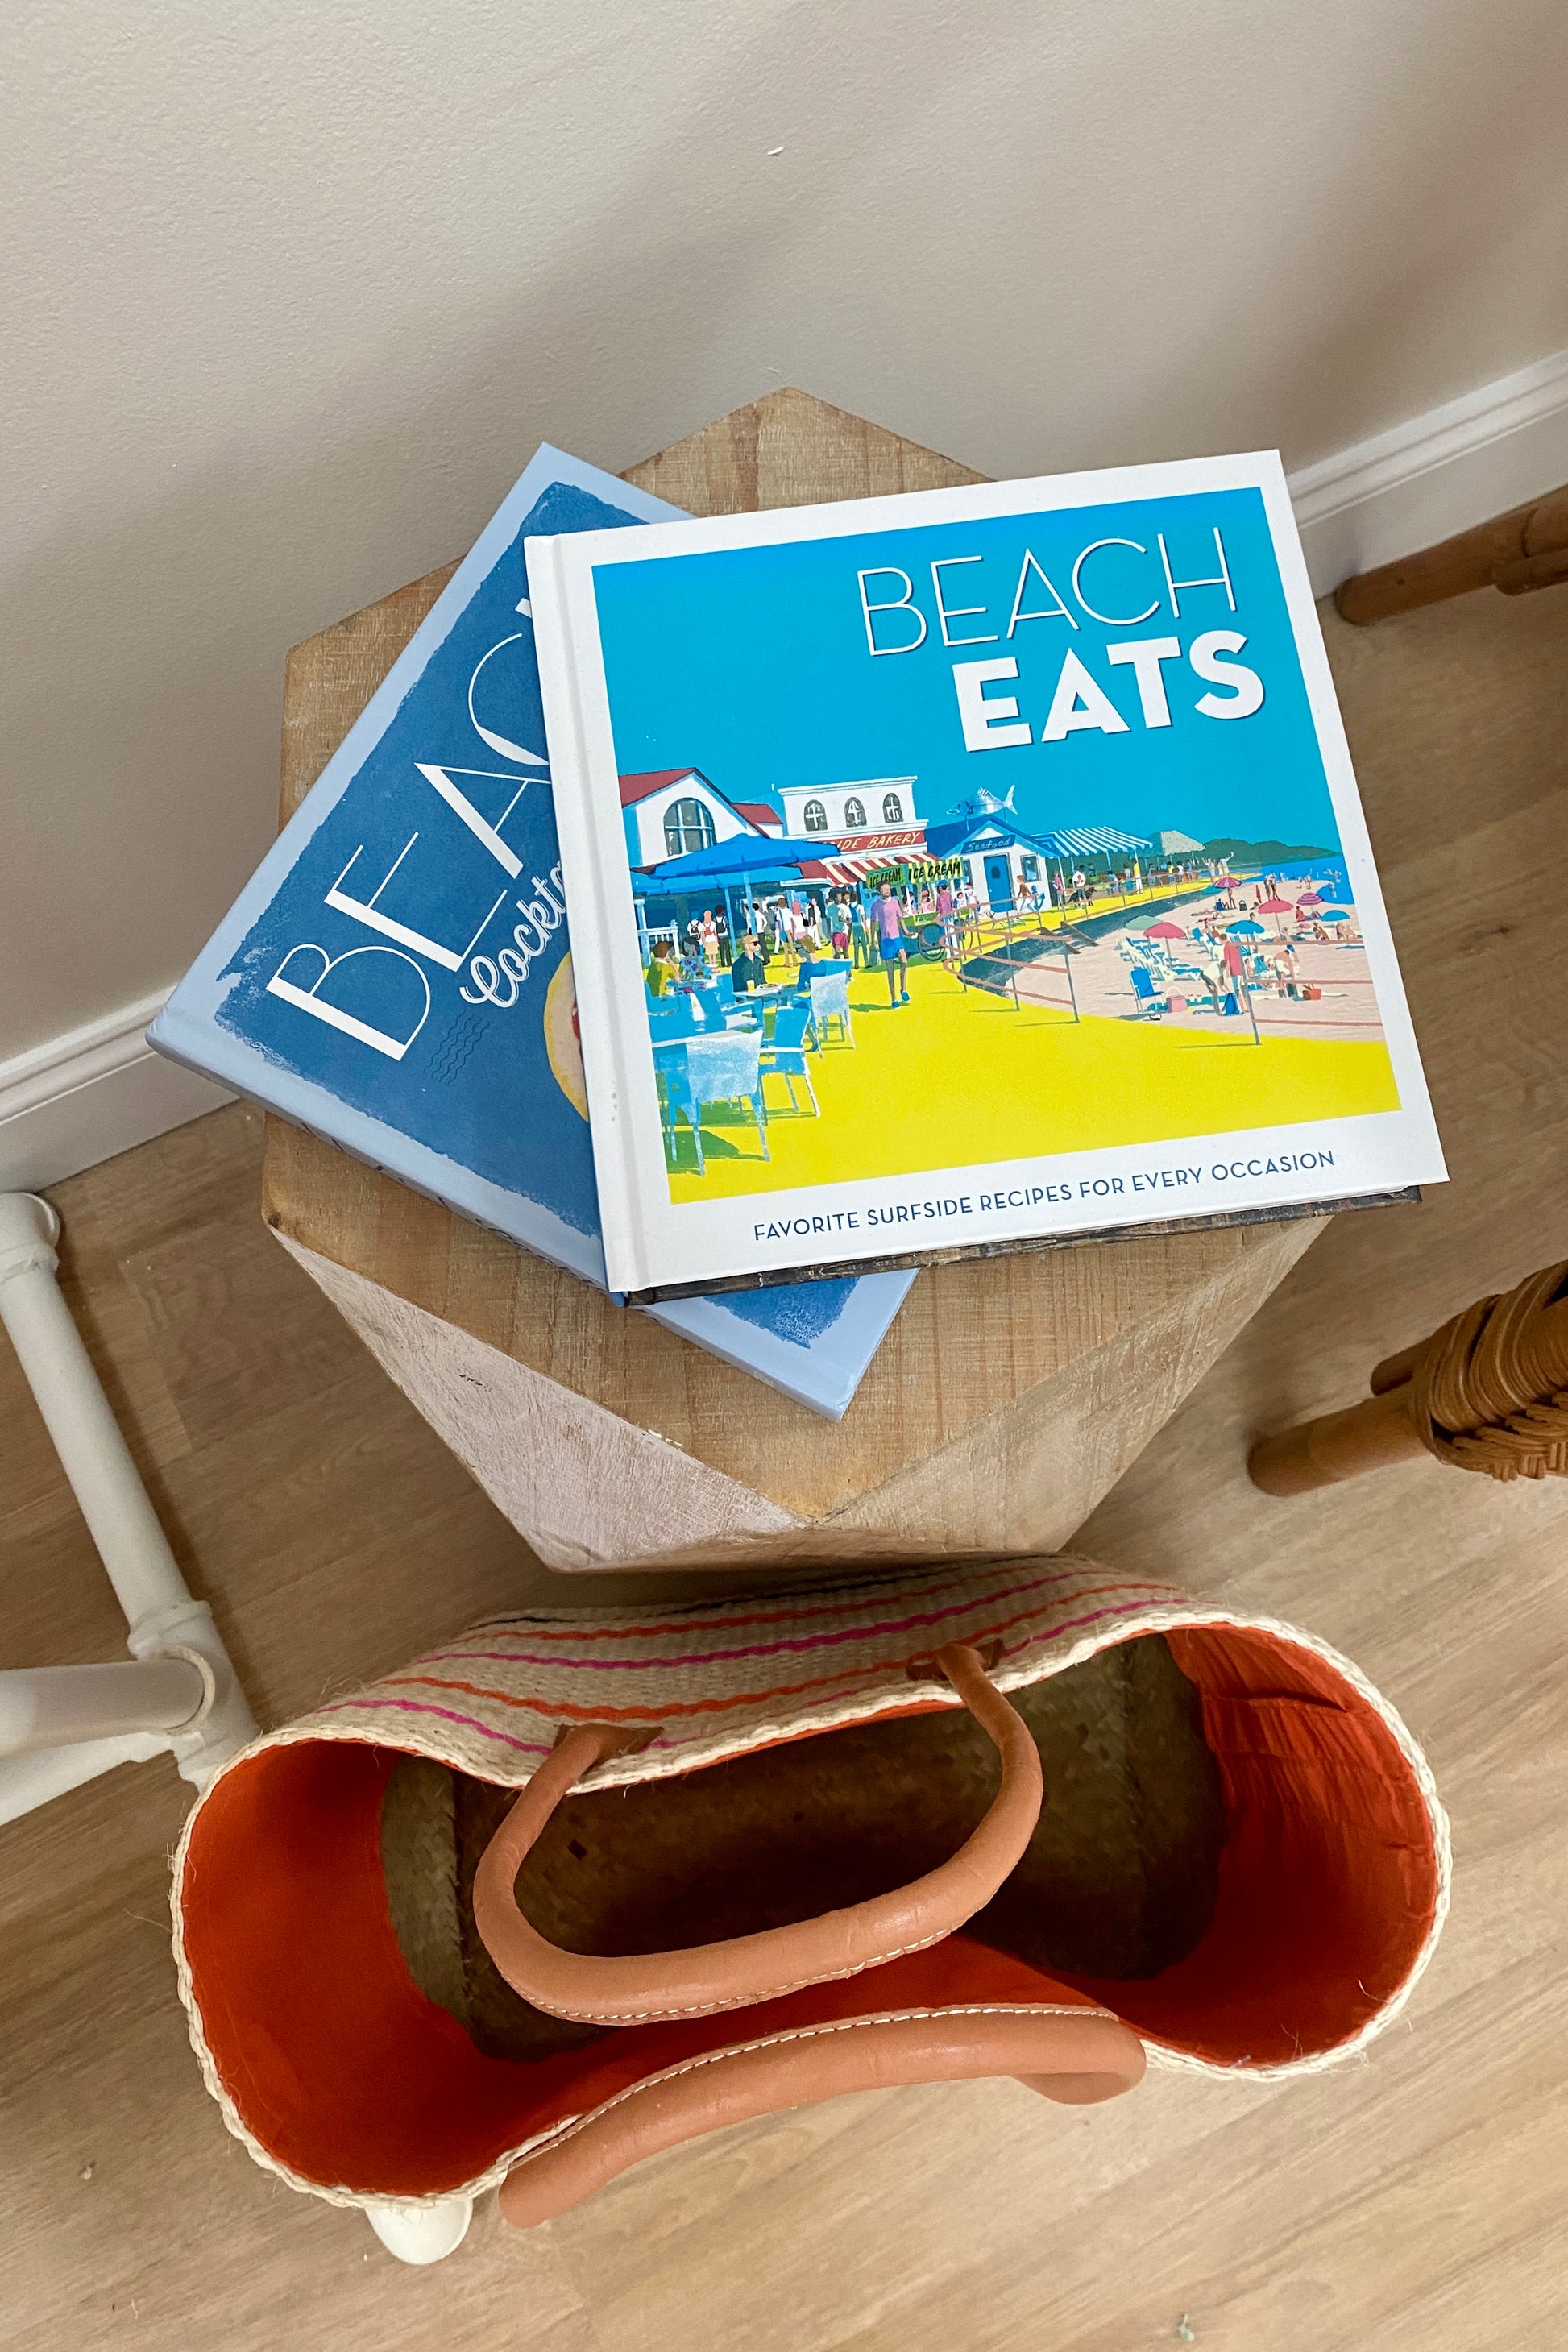 Beach Eats Hardcover Book from Southern Sunday